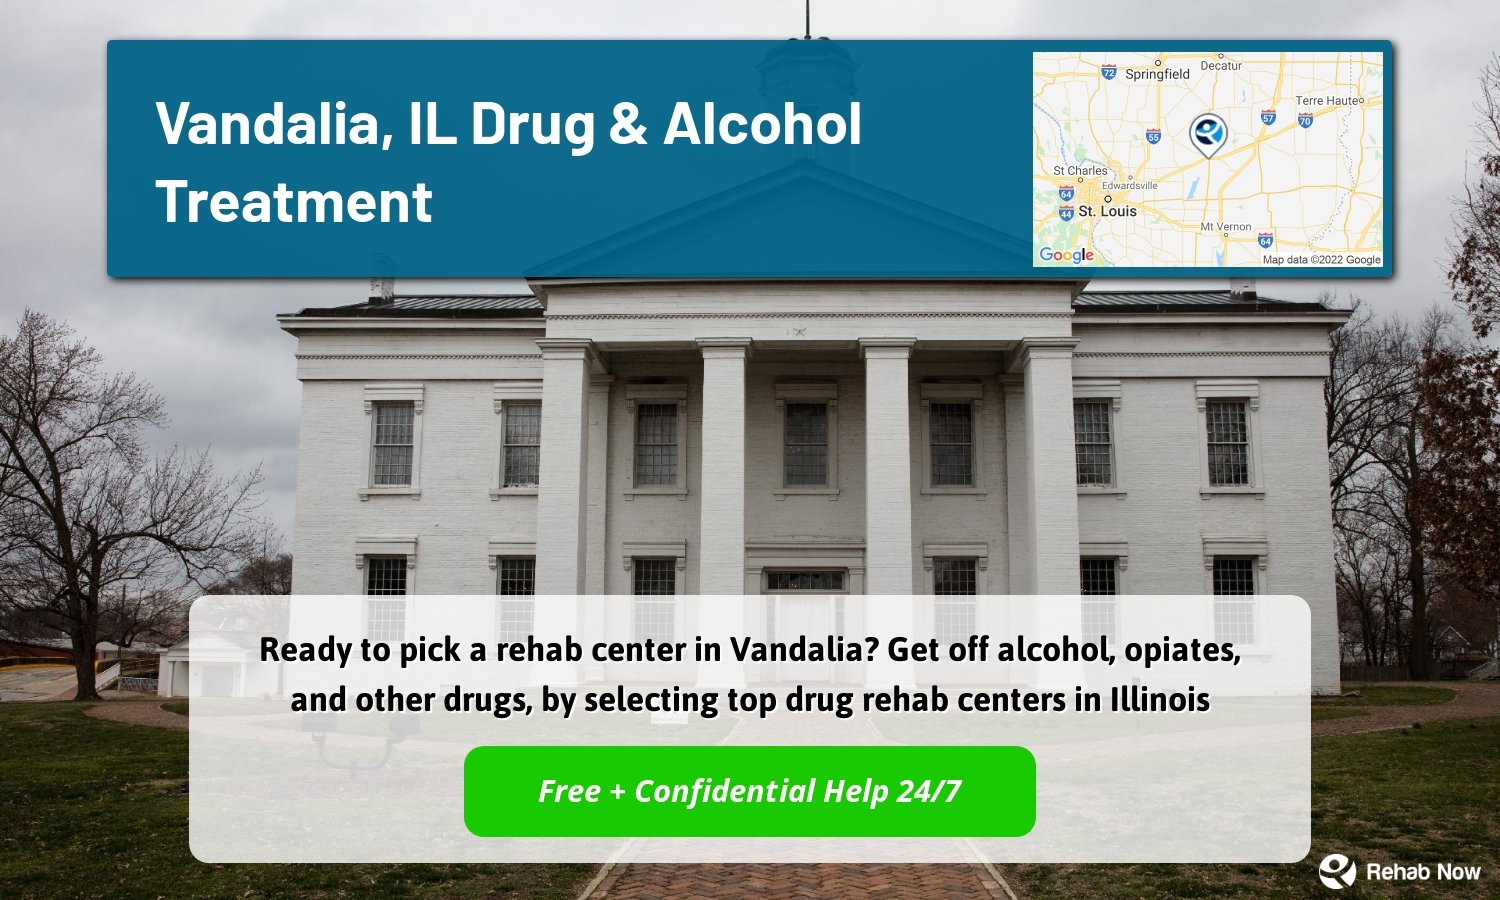 Ready to pick a rehab center in Vandalia? Get off alcohol, opiates, and other drugs, by selecting top drug rehab centers in Illinois